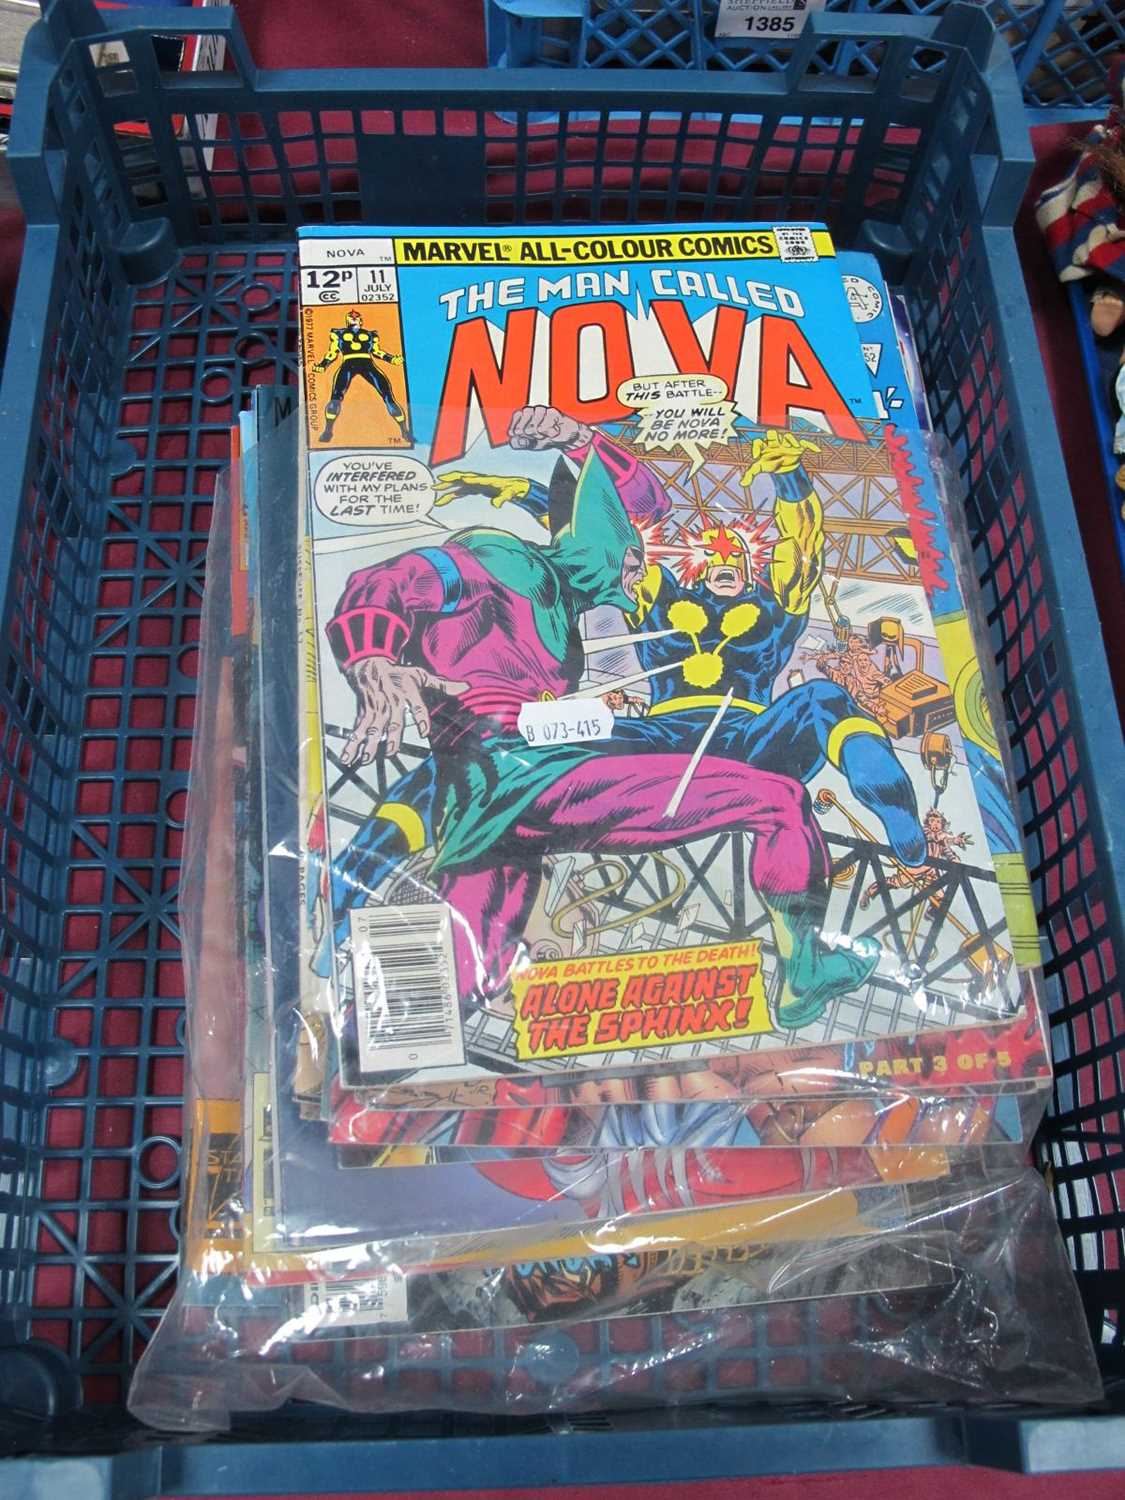 Comics, to include Marvel - The Man Called Nova #11, Amazing Stores of Suspense #52, and a